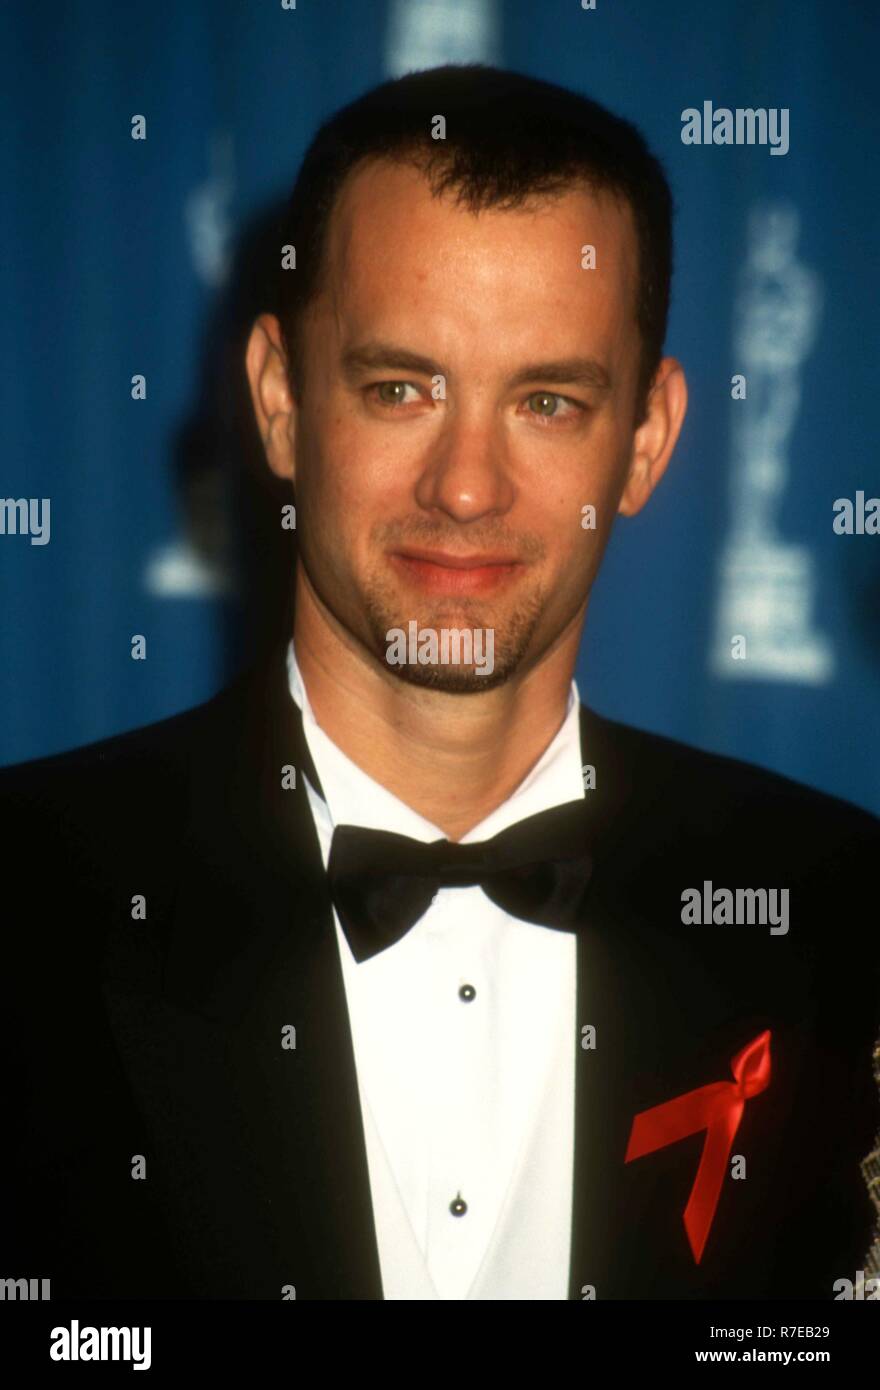 Los Angeles Ca March 29 Actor Tom Hanks Attends The 65th Annual